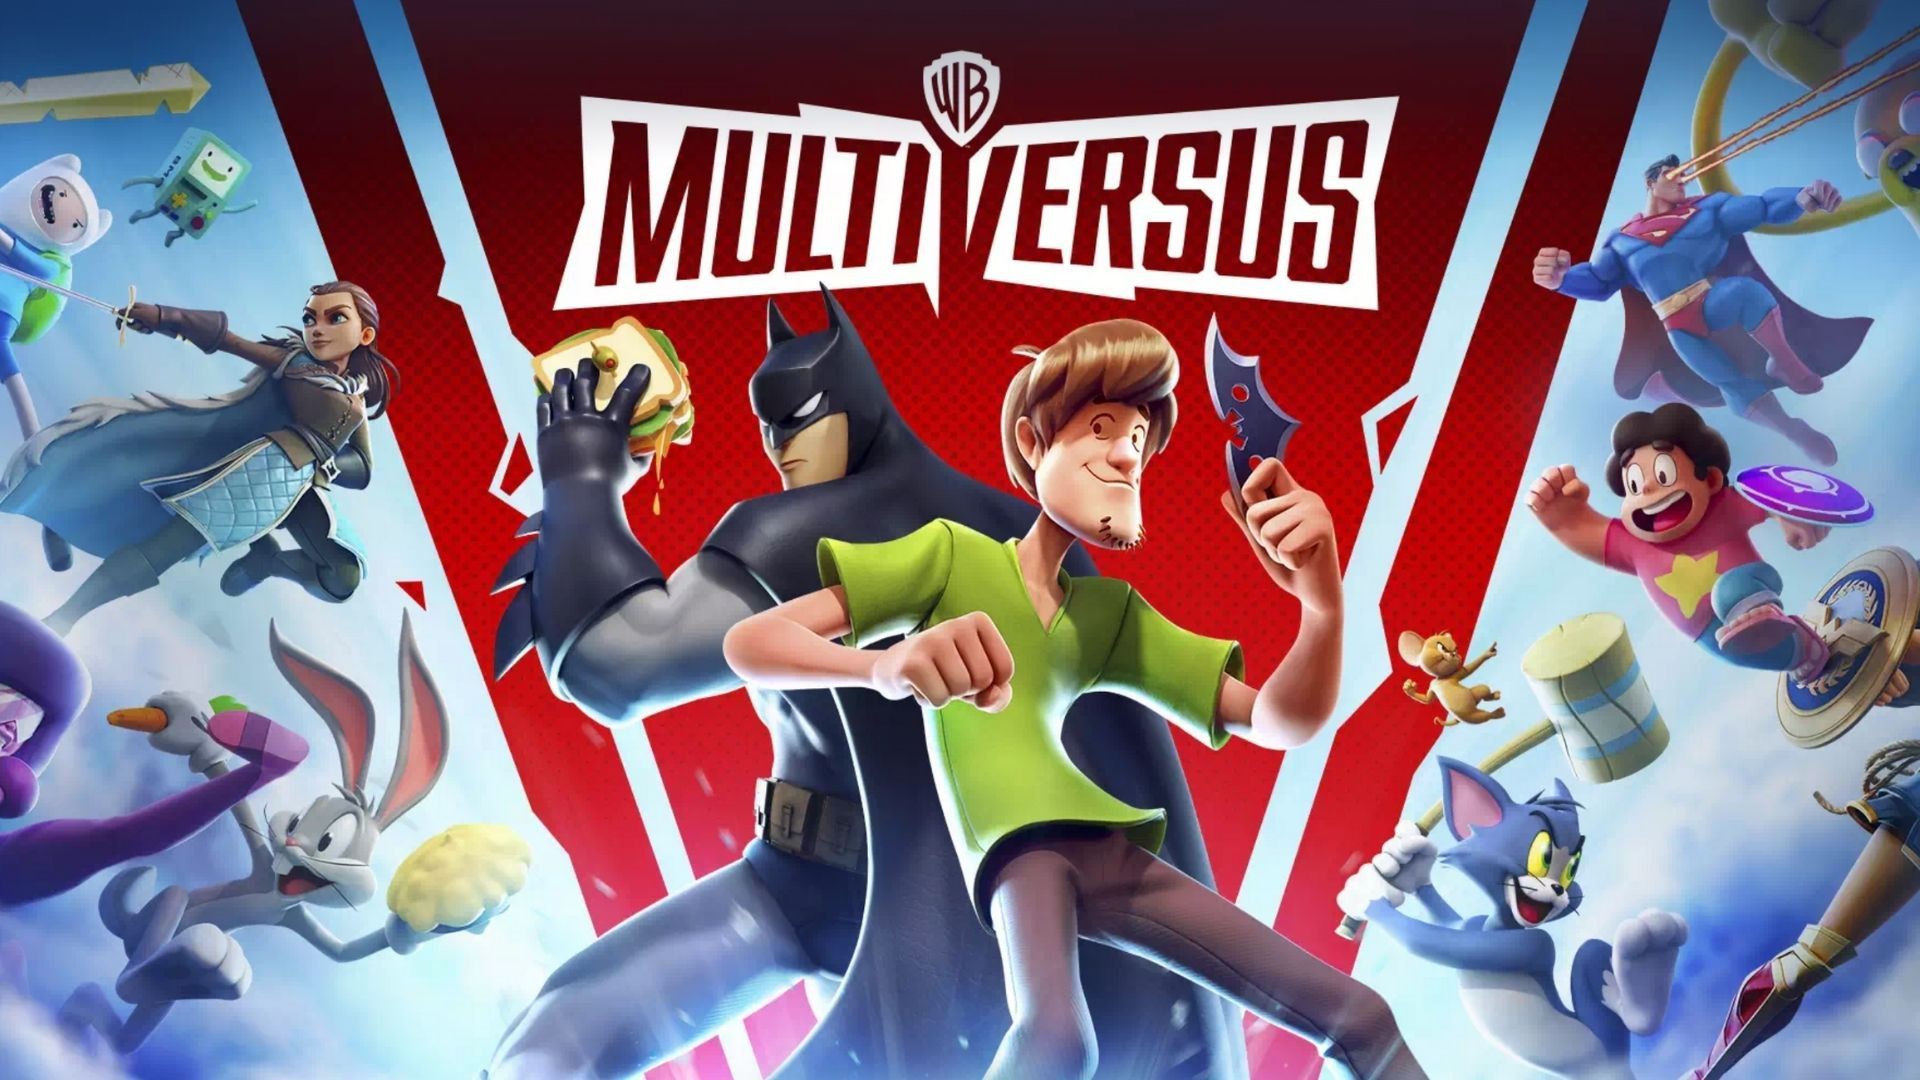 Does 'MultiVersus' have local multiplayer?